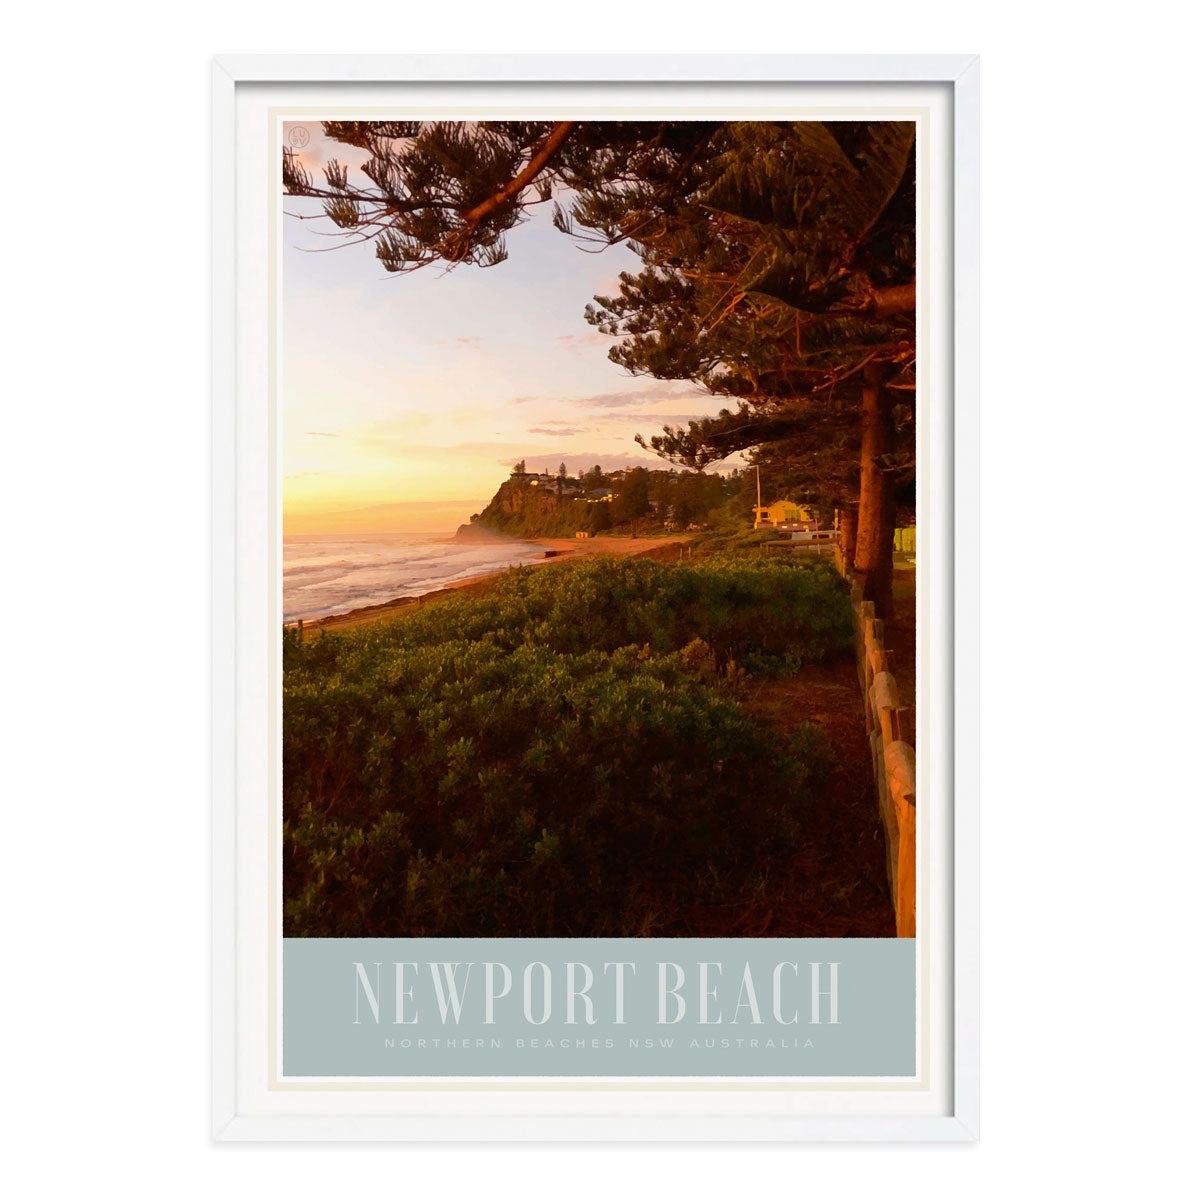 Newport beach retro vintage poster print in white frame from places we luv